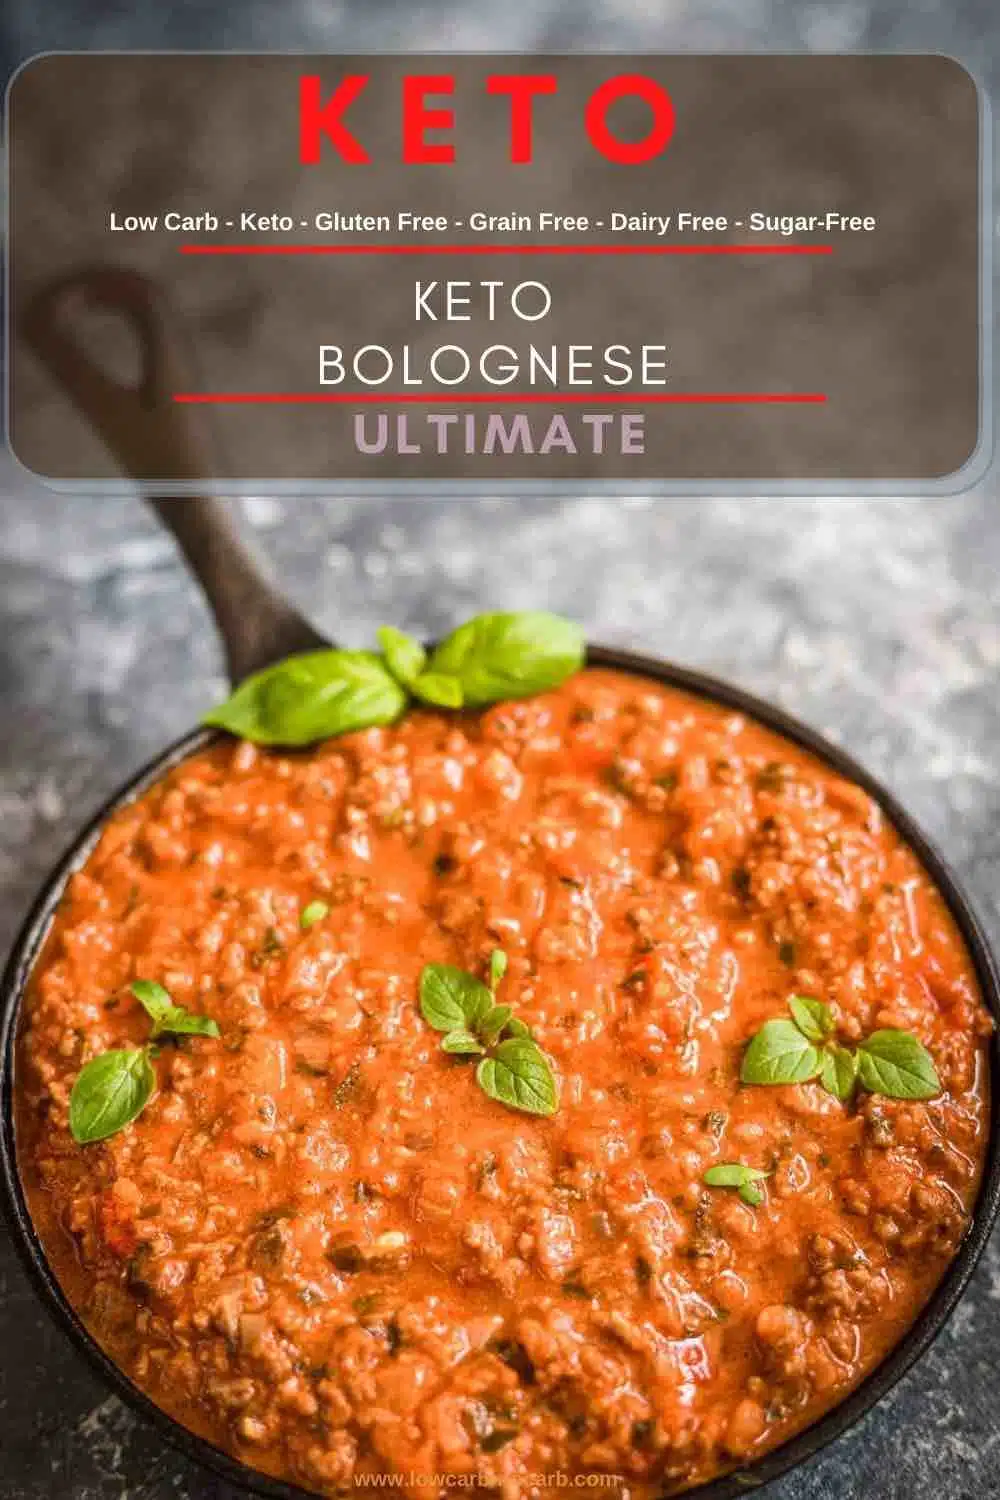 Homemade Healthy Bolognese Sauce ready to serve in a dark baking dish